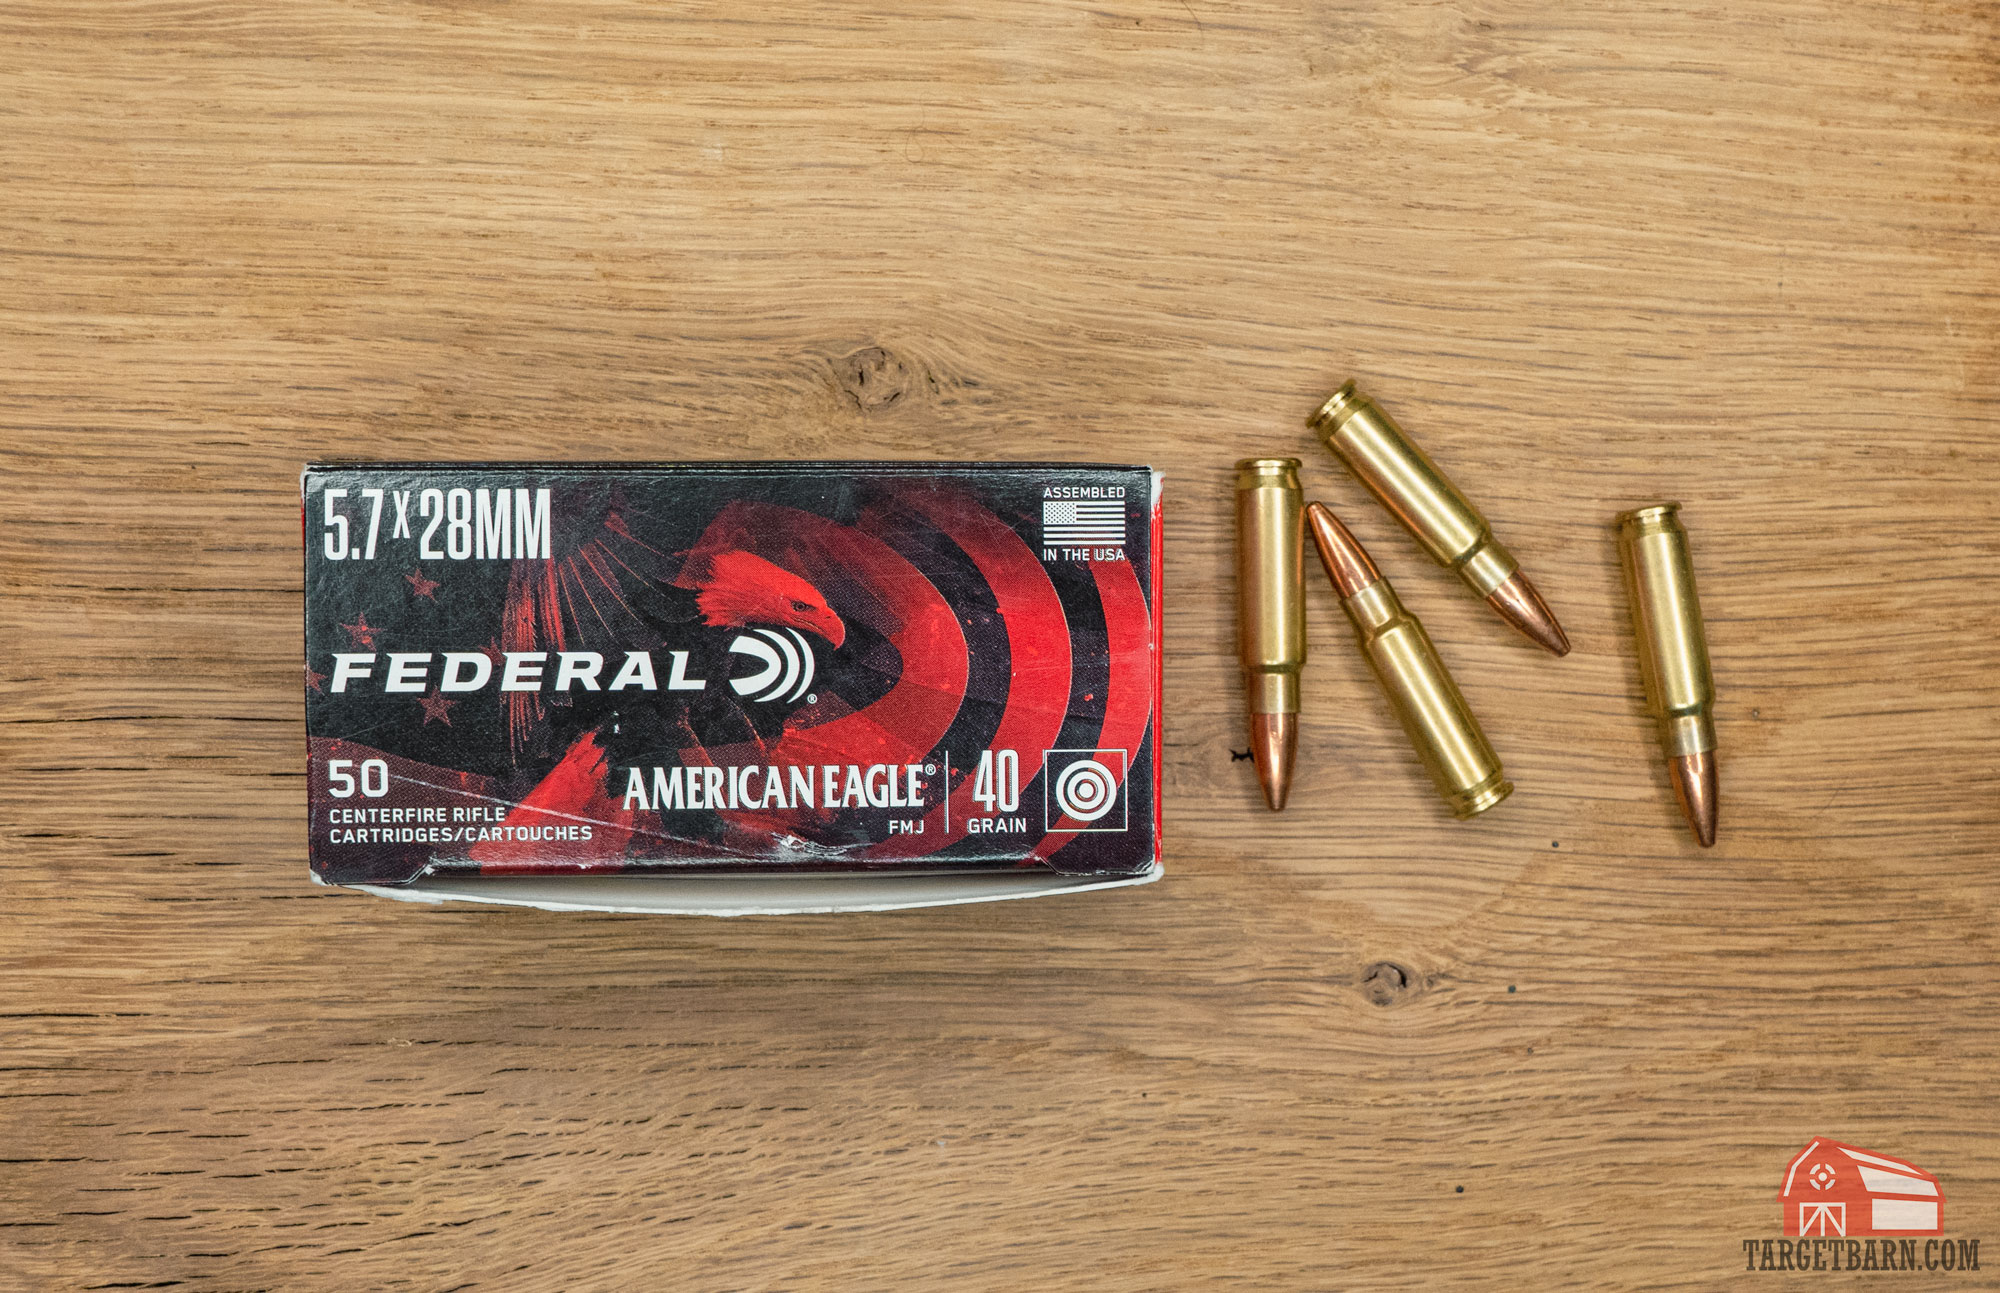 a box of federal 5.7x28mm ammo and loose 5.7 rounds